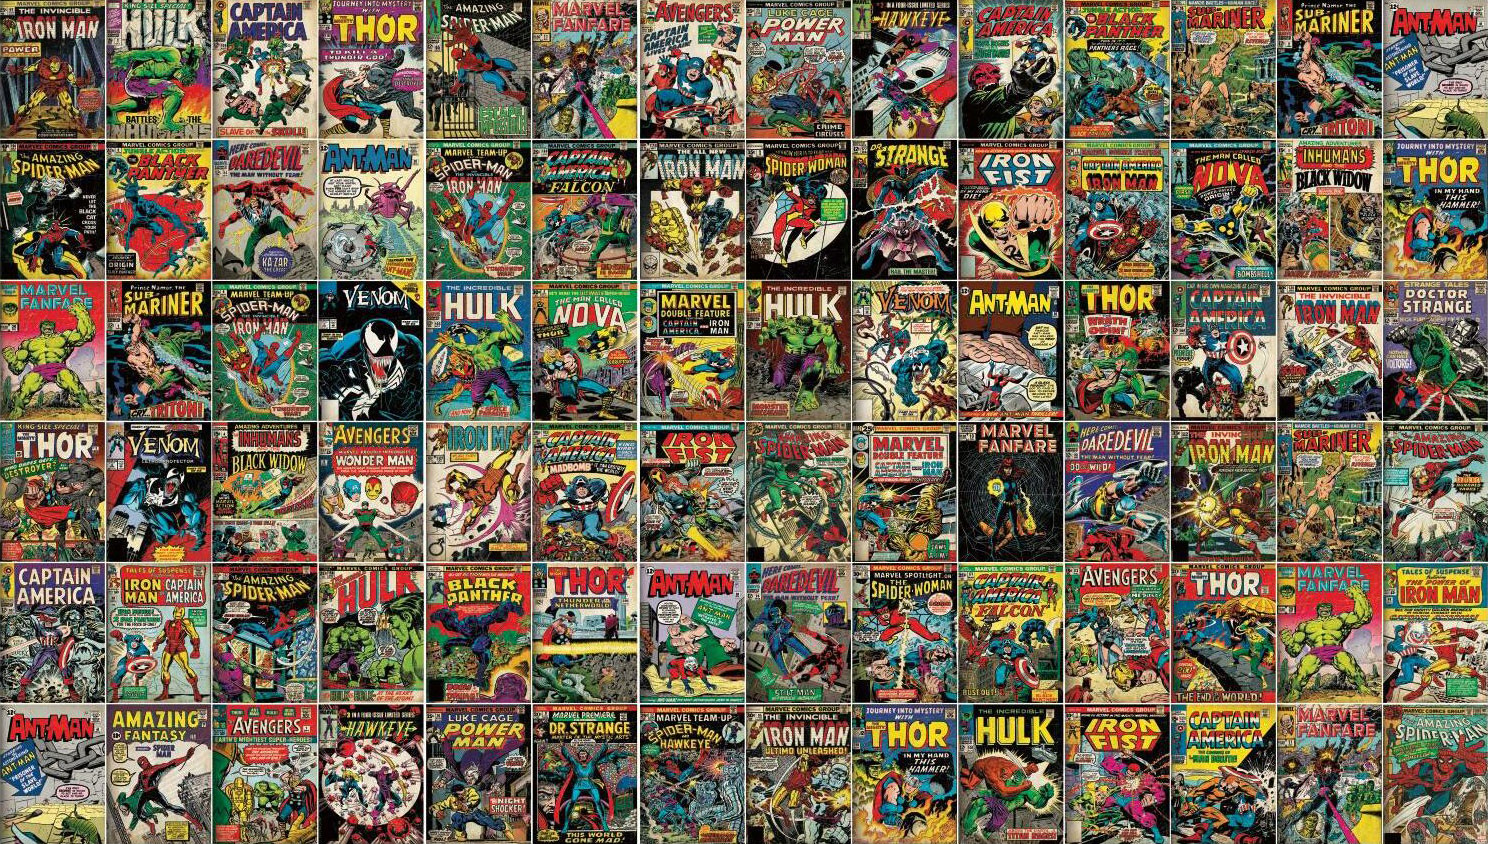 Marvel Comic Cover Wallpaper Mural | Sideshow Collectibles